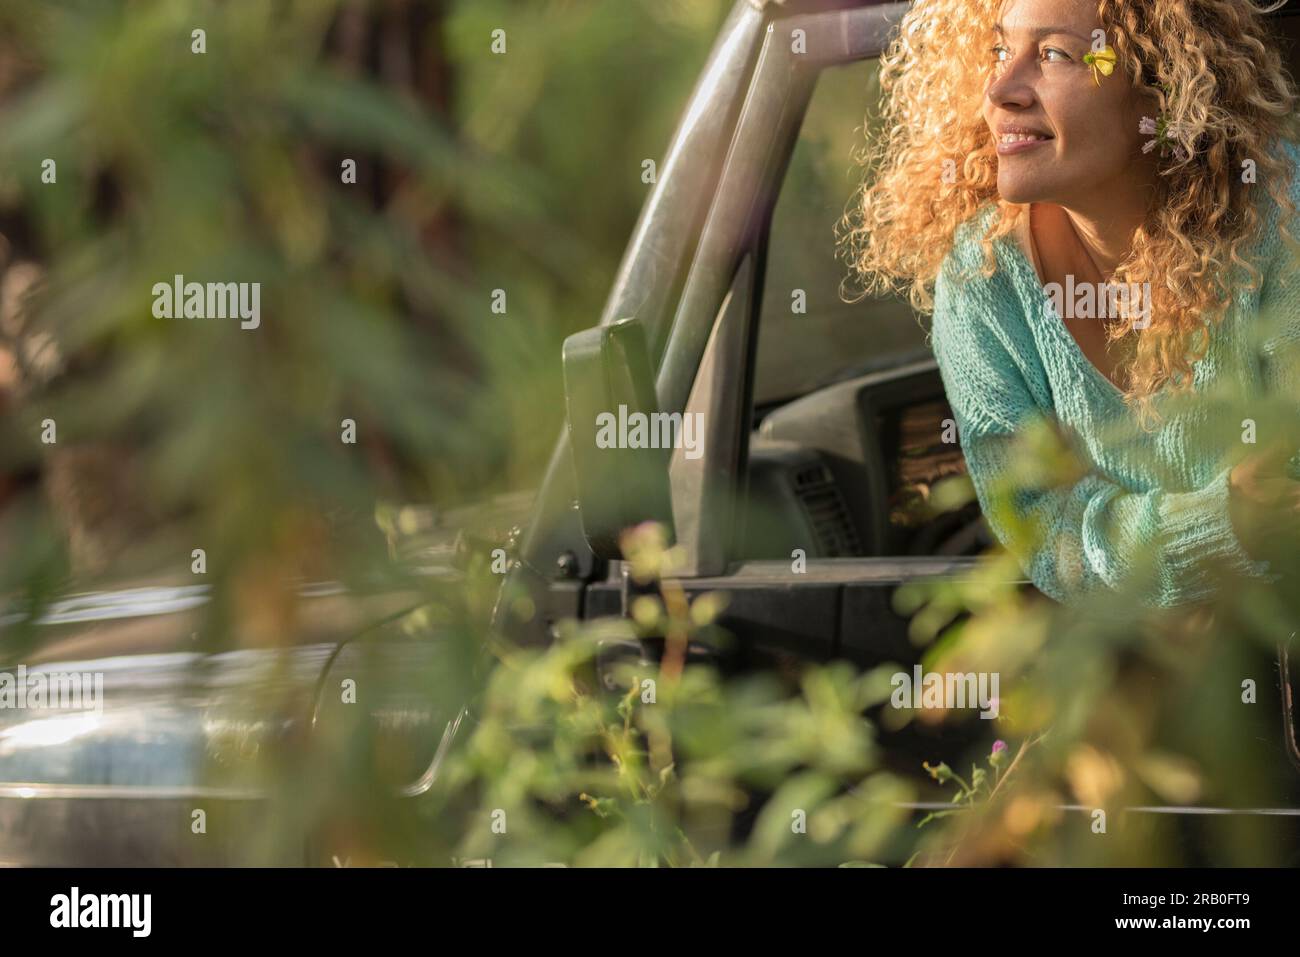 Car travel adventure and love for nature concept lifestyle. One happy woman outside the vehicle window admiring nature around in the bush. Concept of transport and vacation in wild outdoors road trip Stock Photo